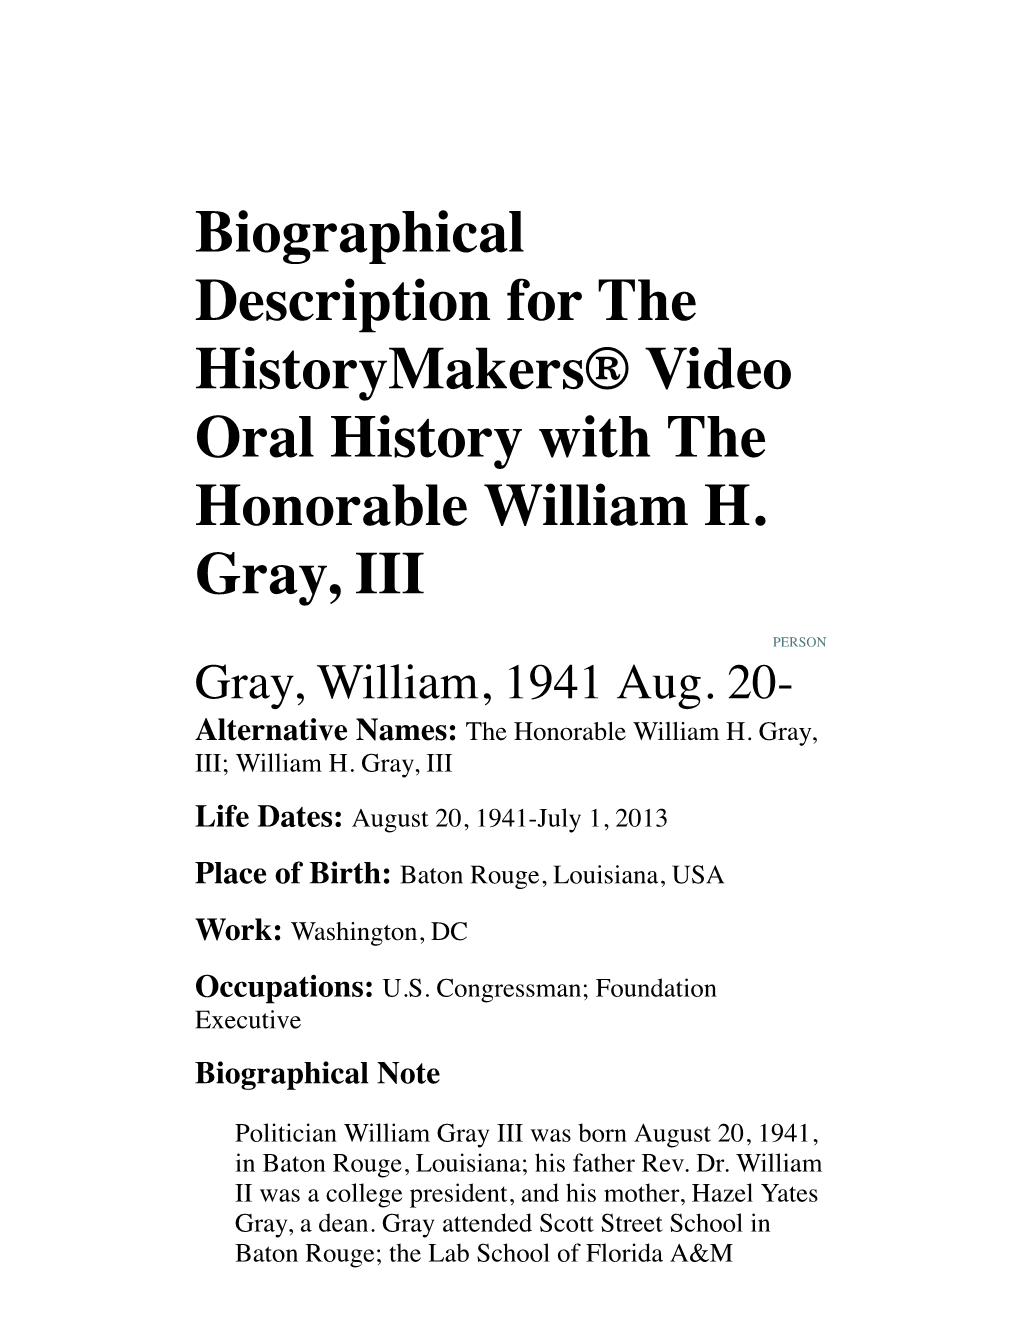 Biographical Description for the Historymakers® Video Oral History with the Honorable William H